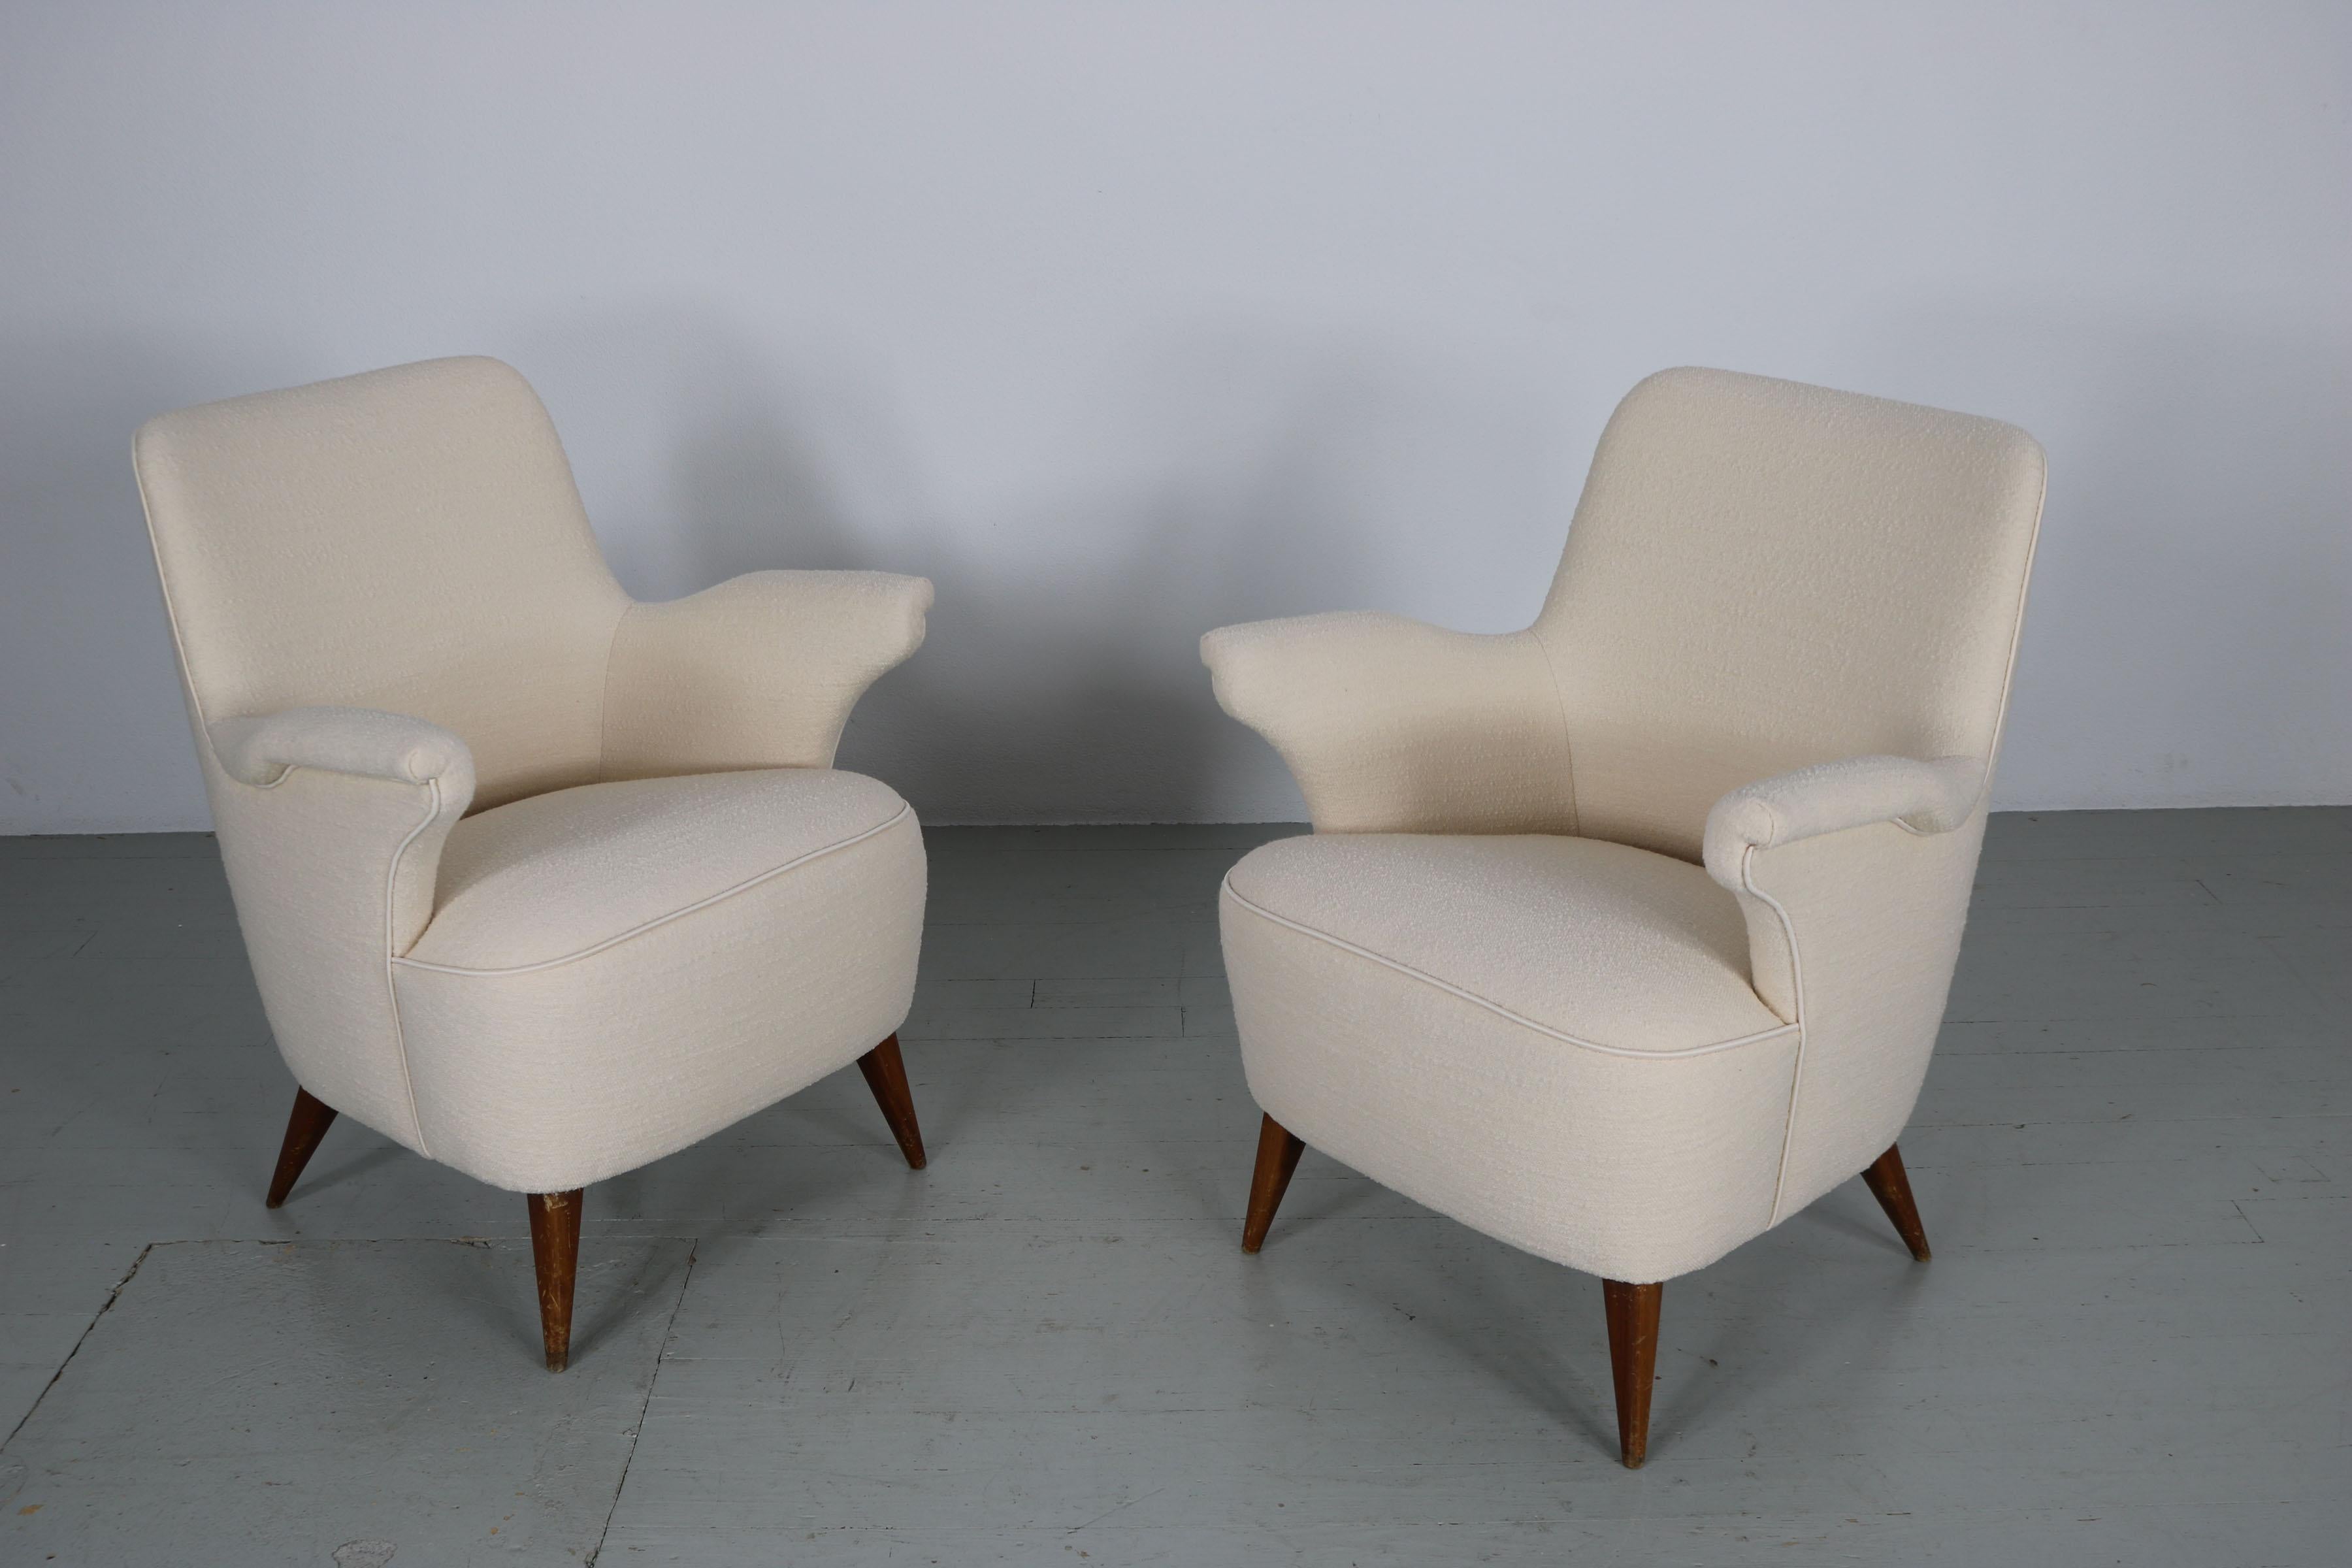 Set of 2 Cream Coloured Italian Marine Armchairs from the 1950s For Sale 2